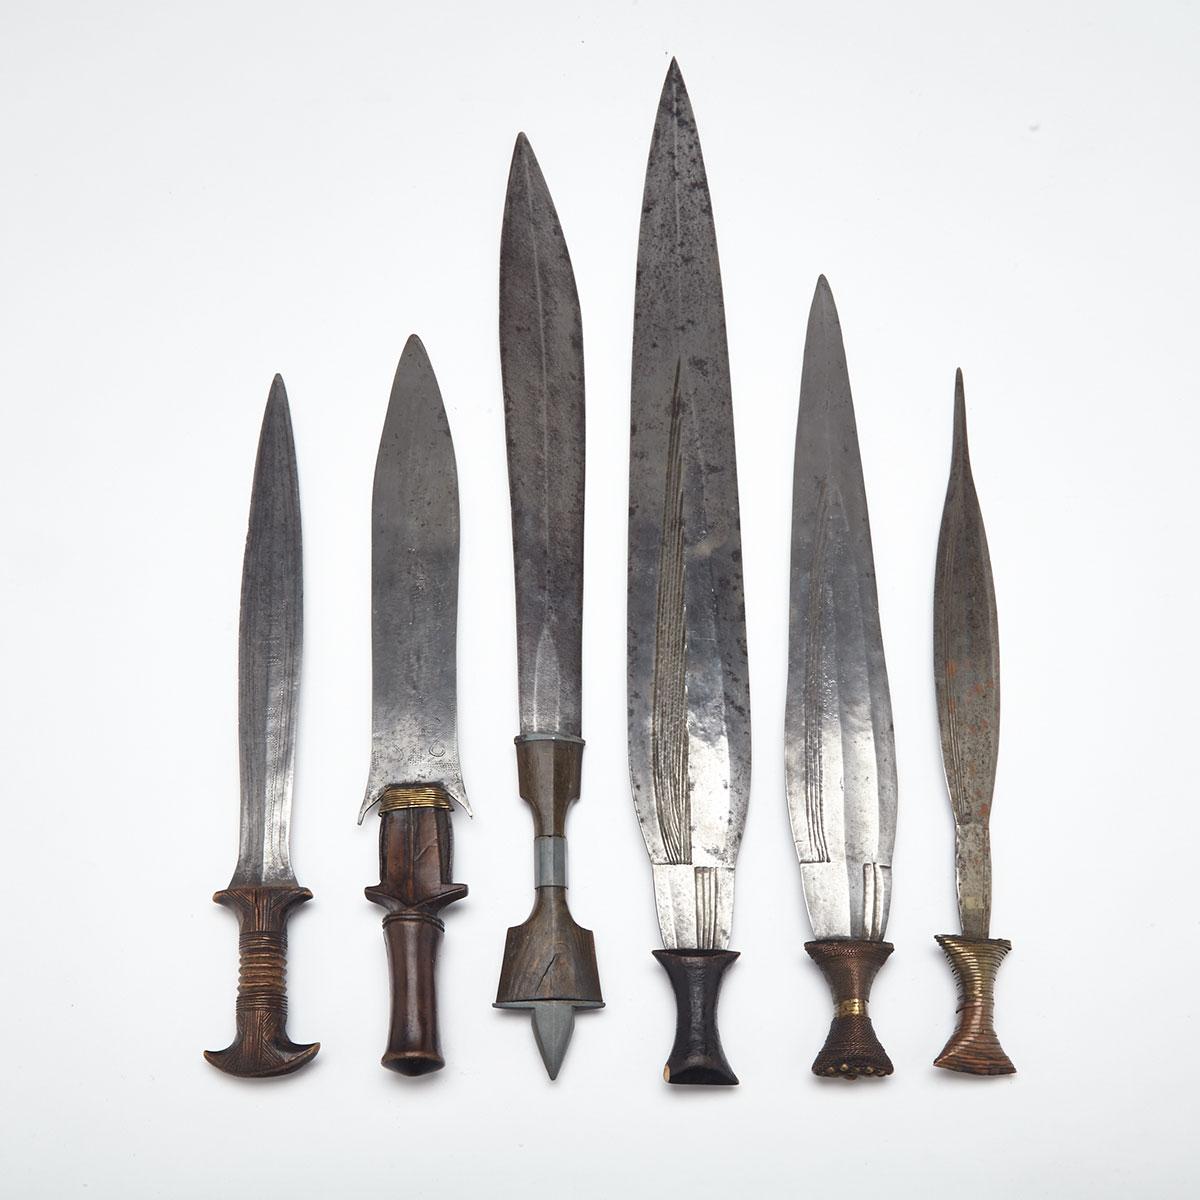 Six African Short Swords, 19th/20th centuries